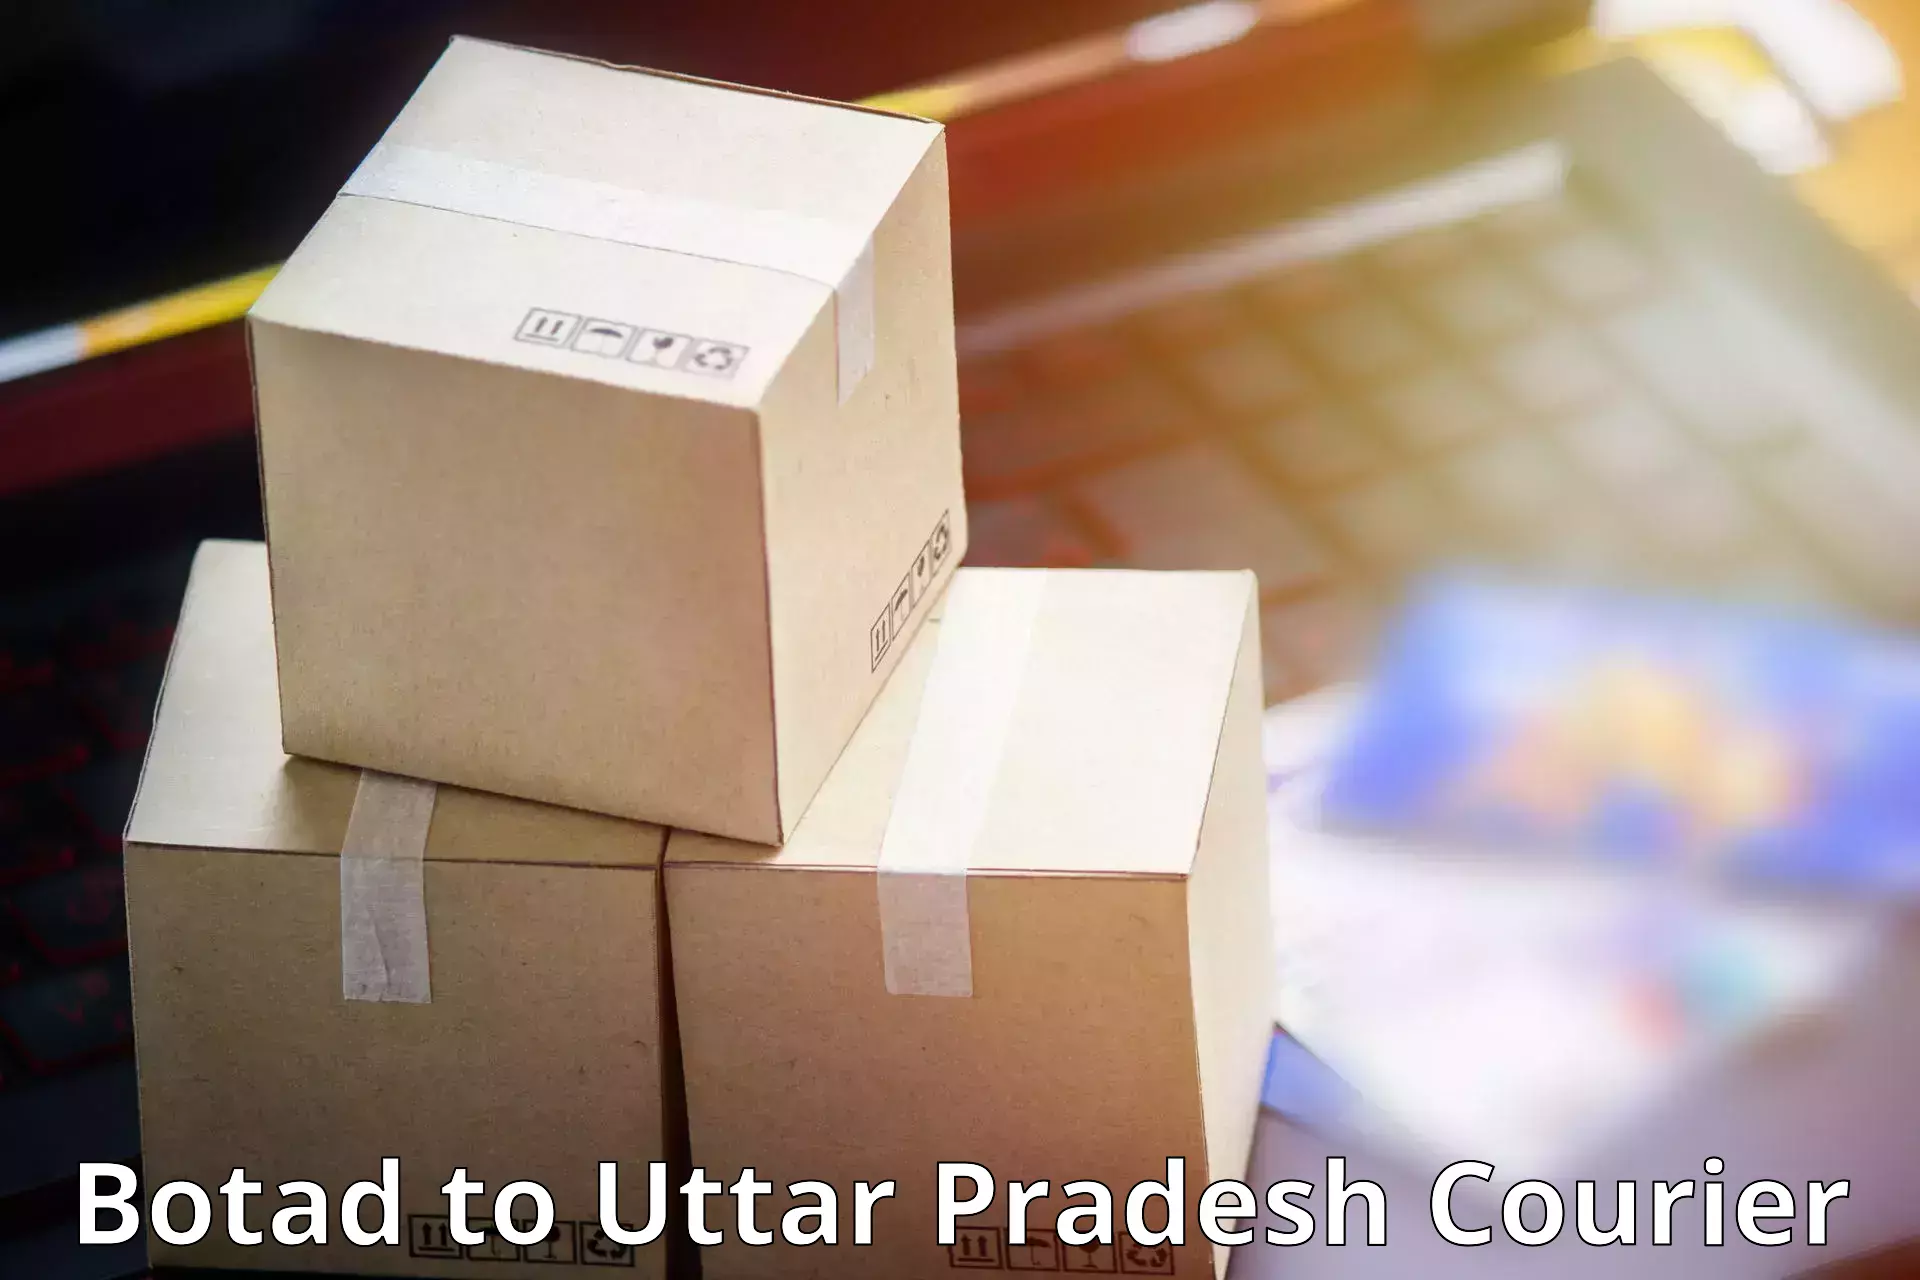 Courier service booking Botad to Noida